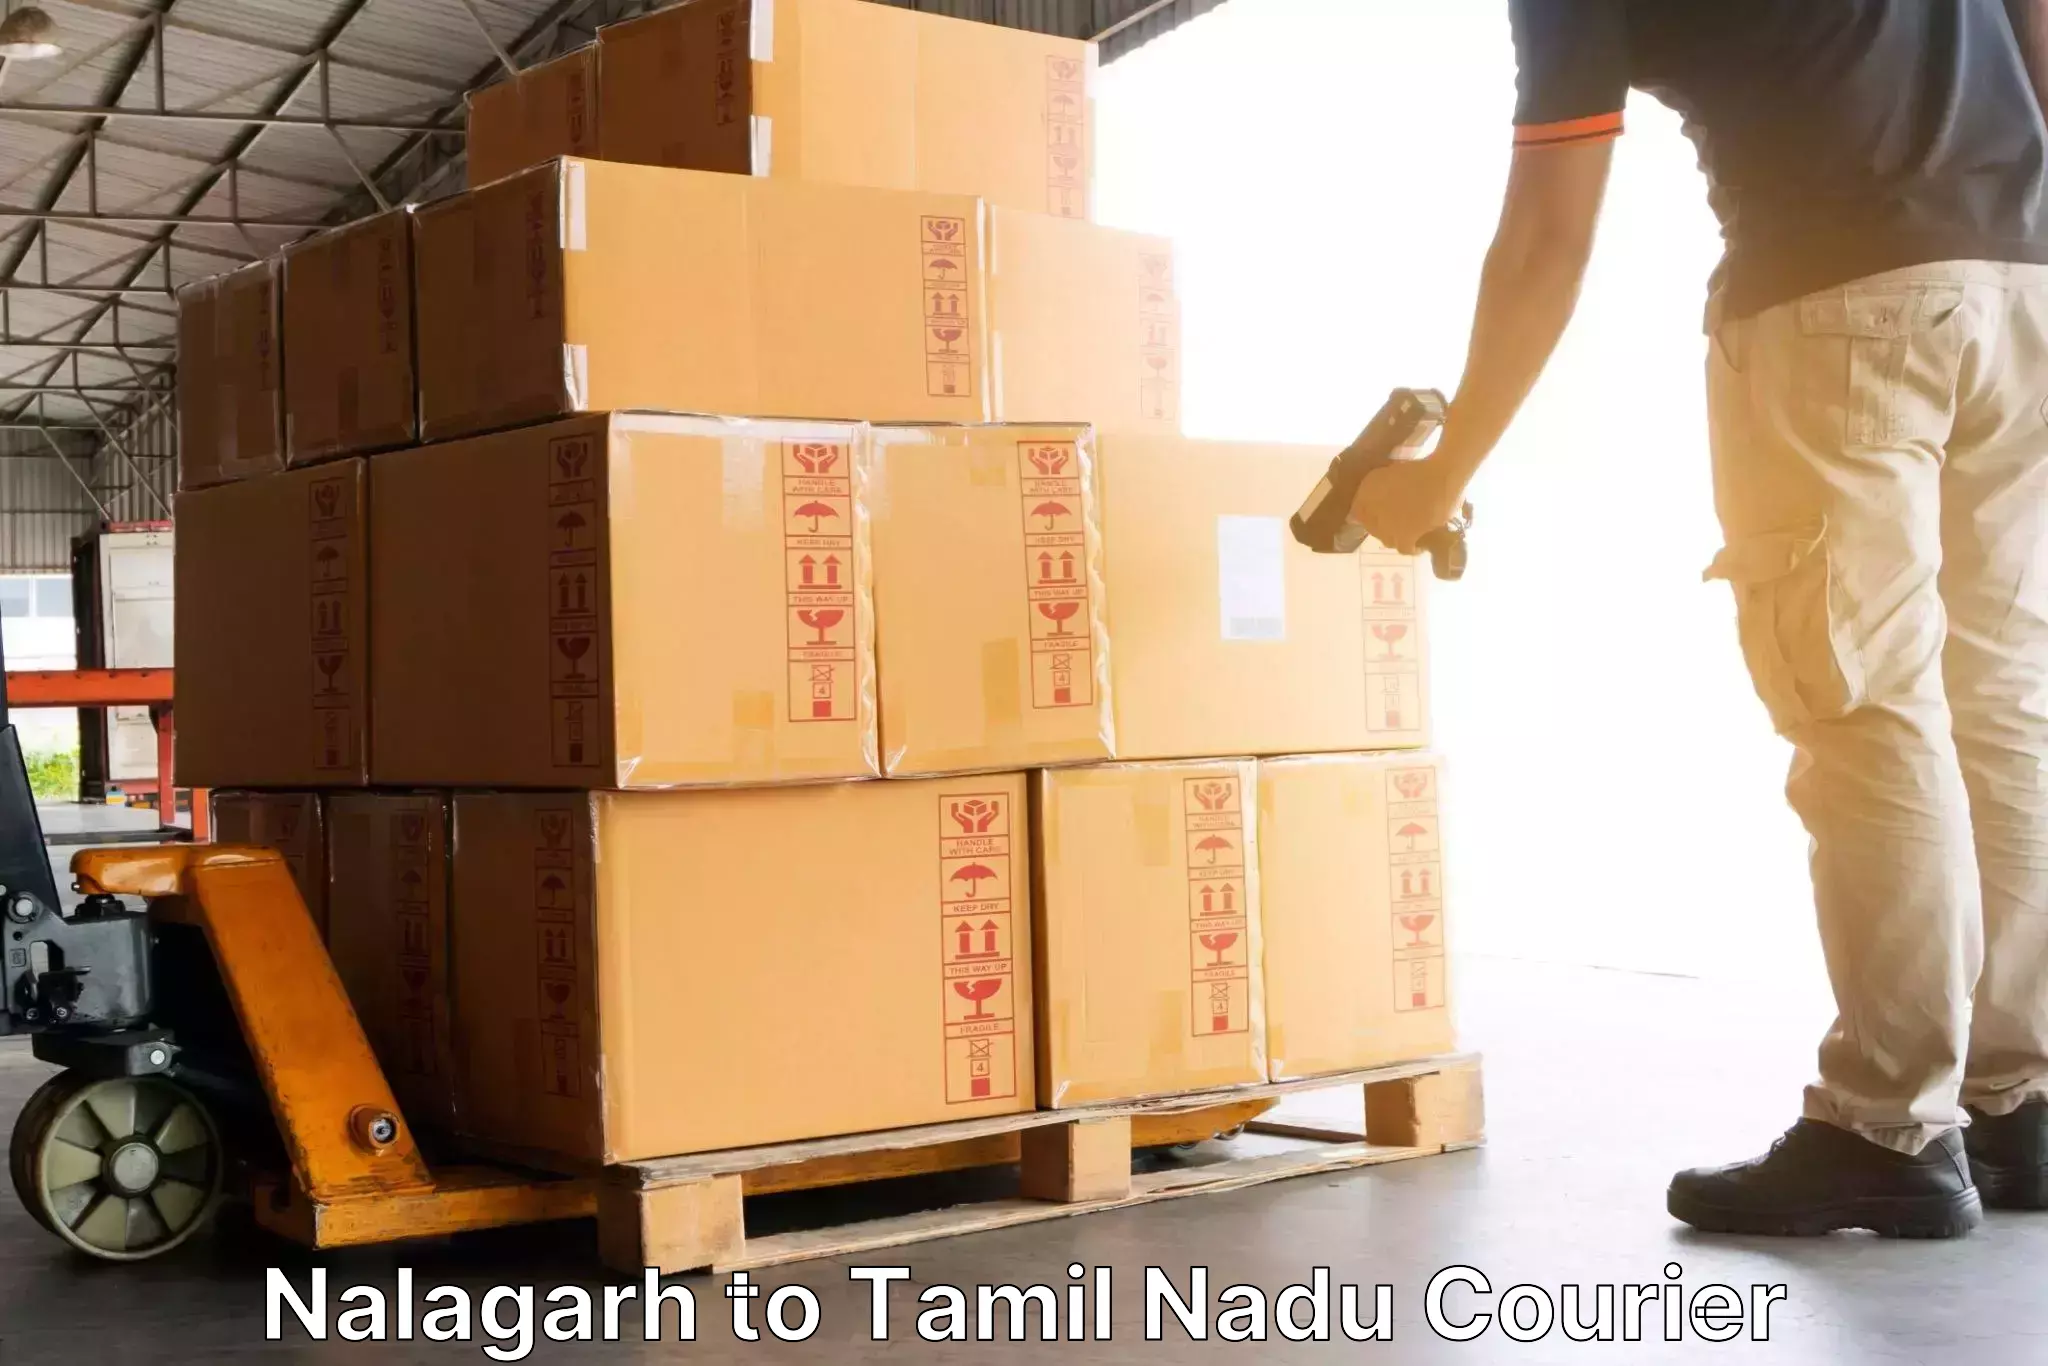 Personalized courier experiences Nalagarh to Tamil Nadu